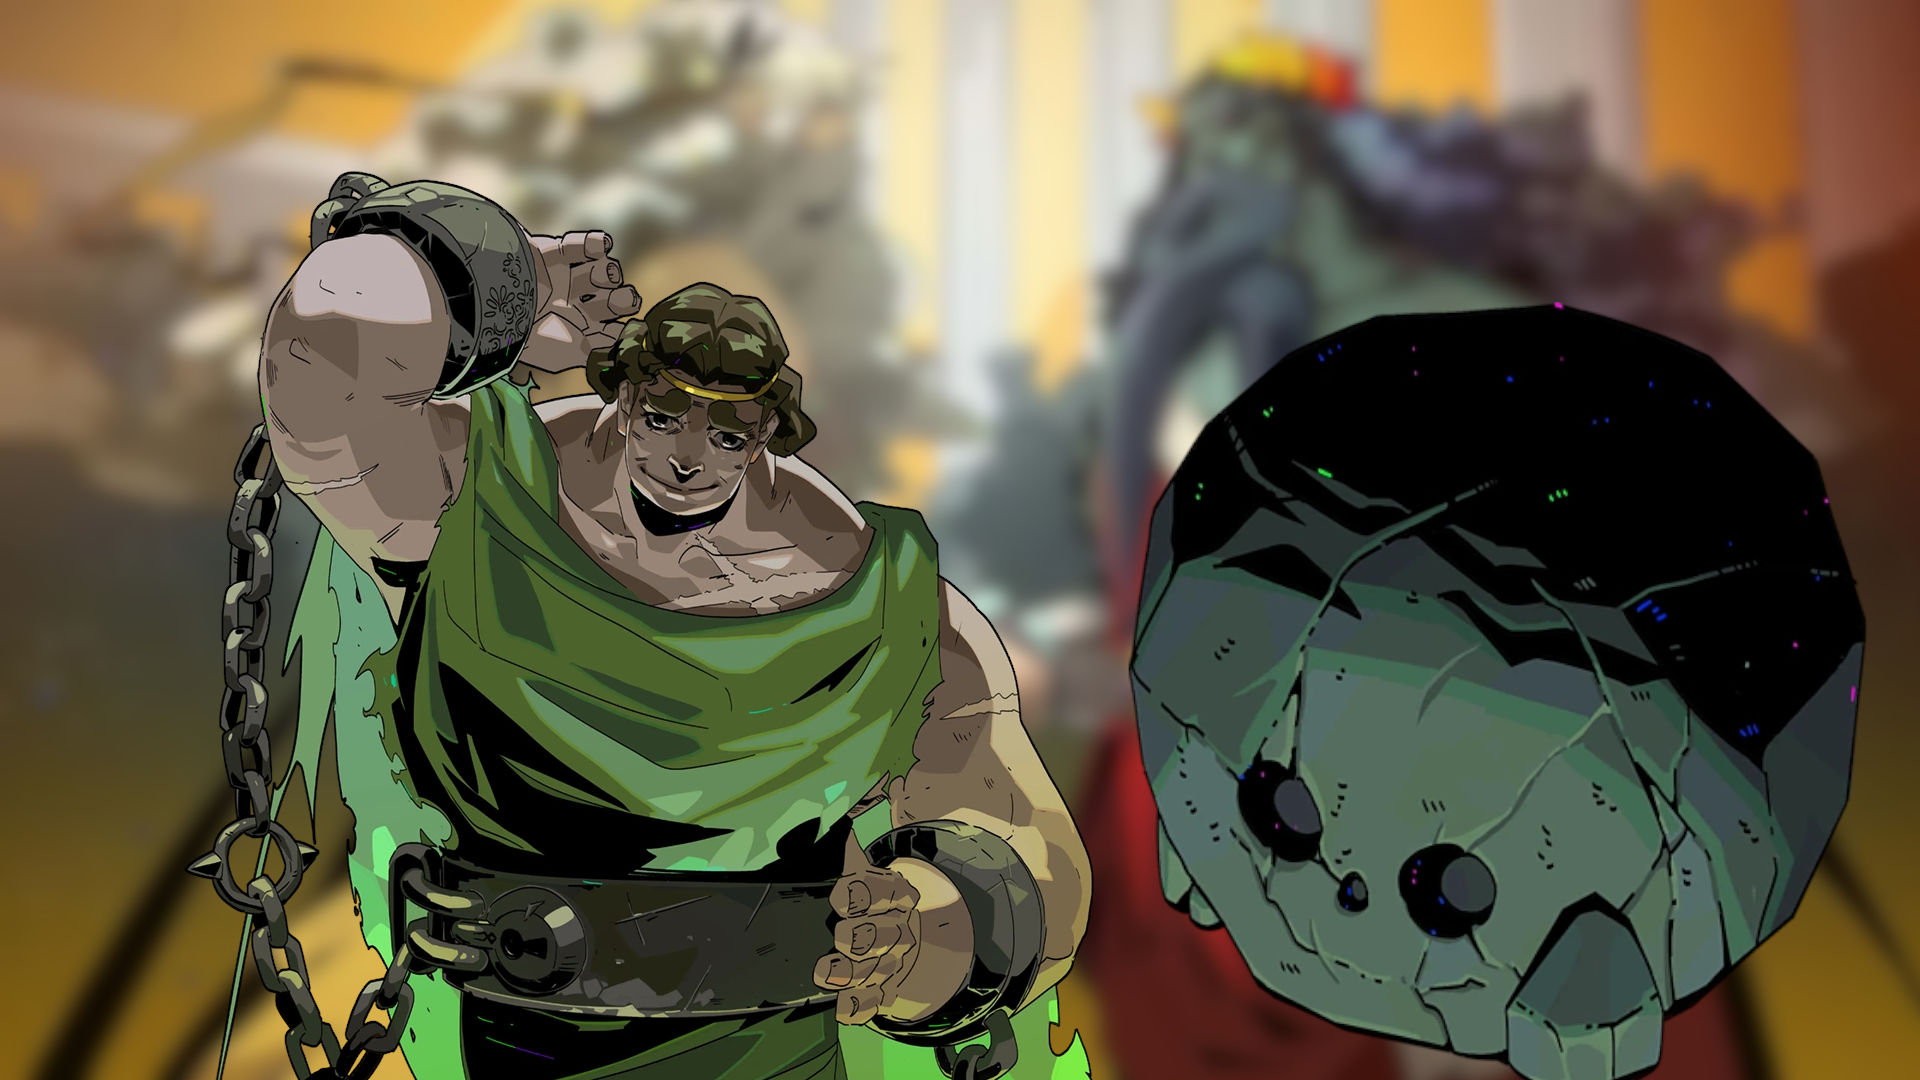 Game art for Sisyphus and Bouldy, two Hades characters that always come together